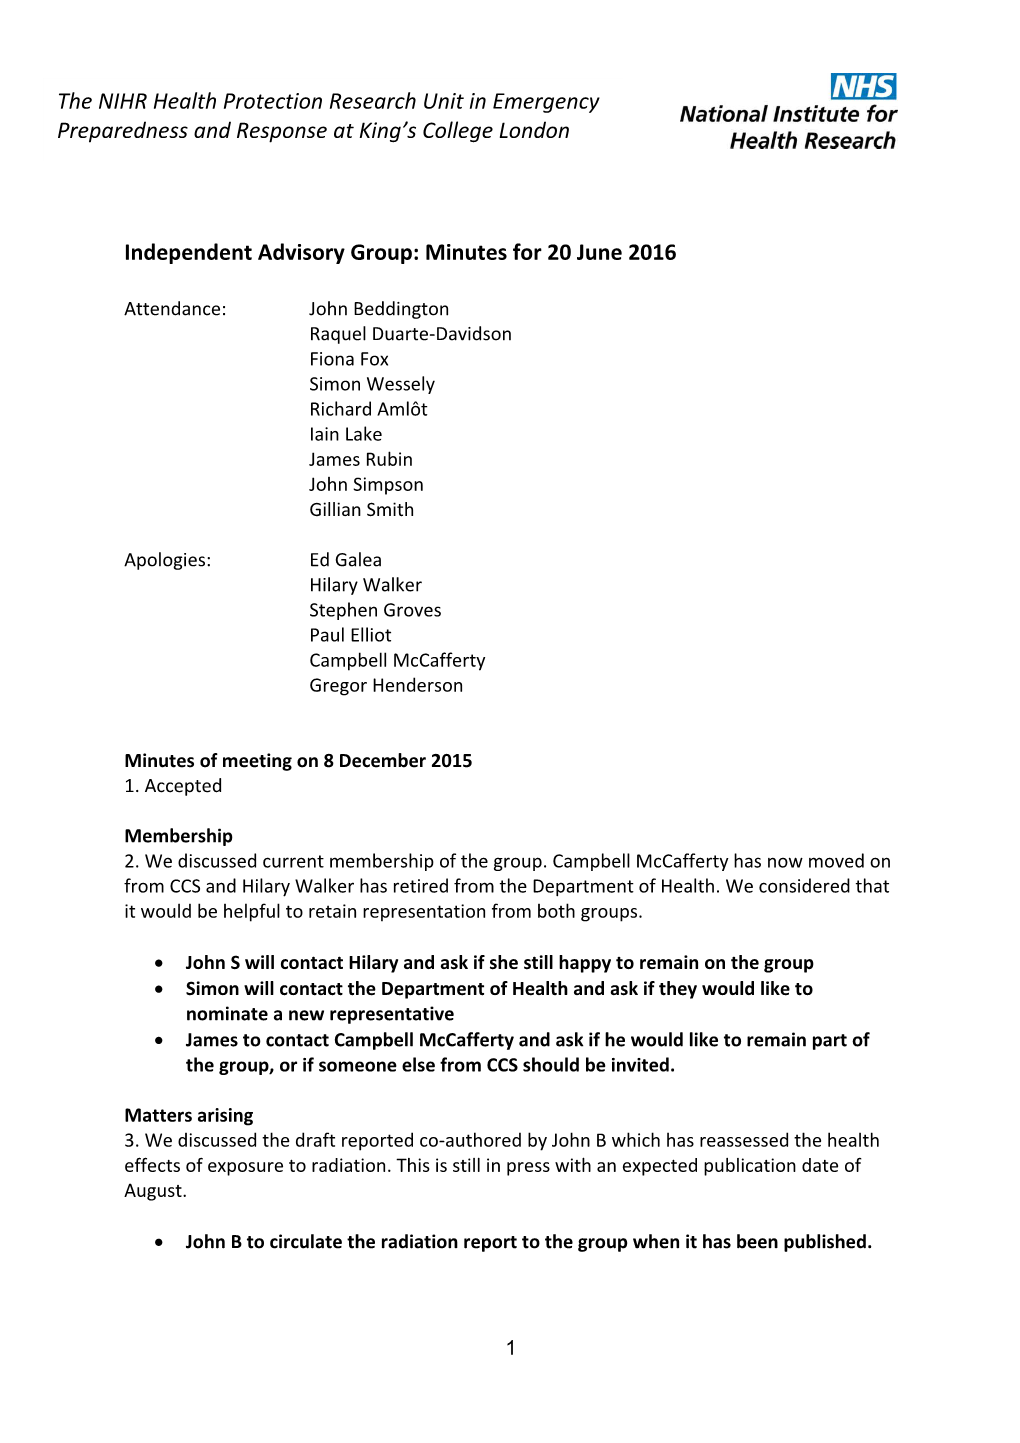 Independent Advisory Group: Minutes for 20June 2016